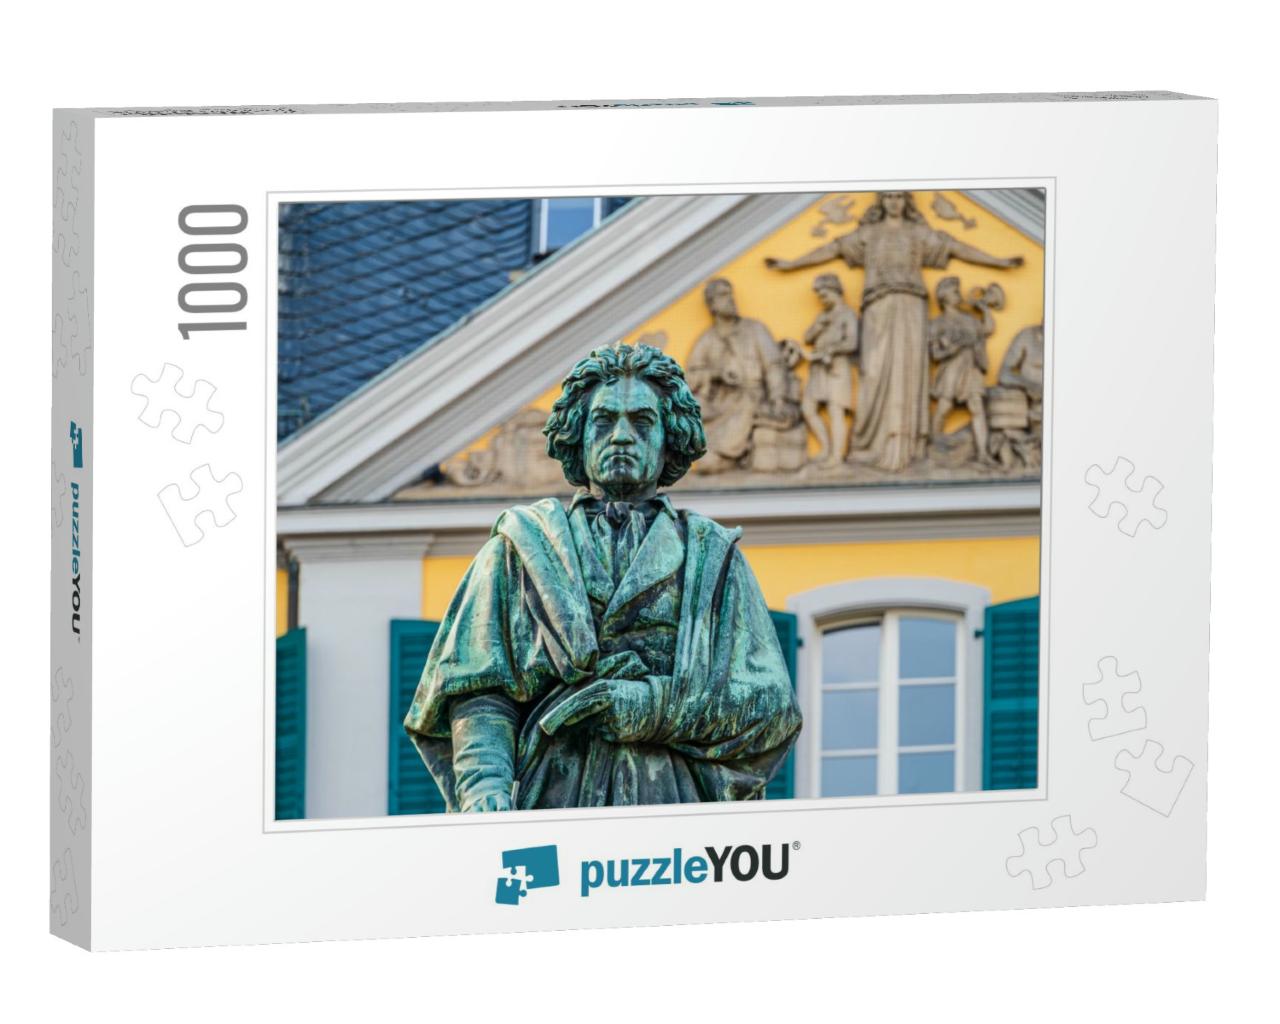 Beethoven Monument by Ernst Julius Hahnel, Large Bronze S... Jigsaw Puzzle with 1000 pieces